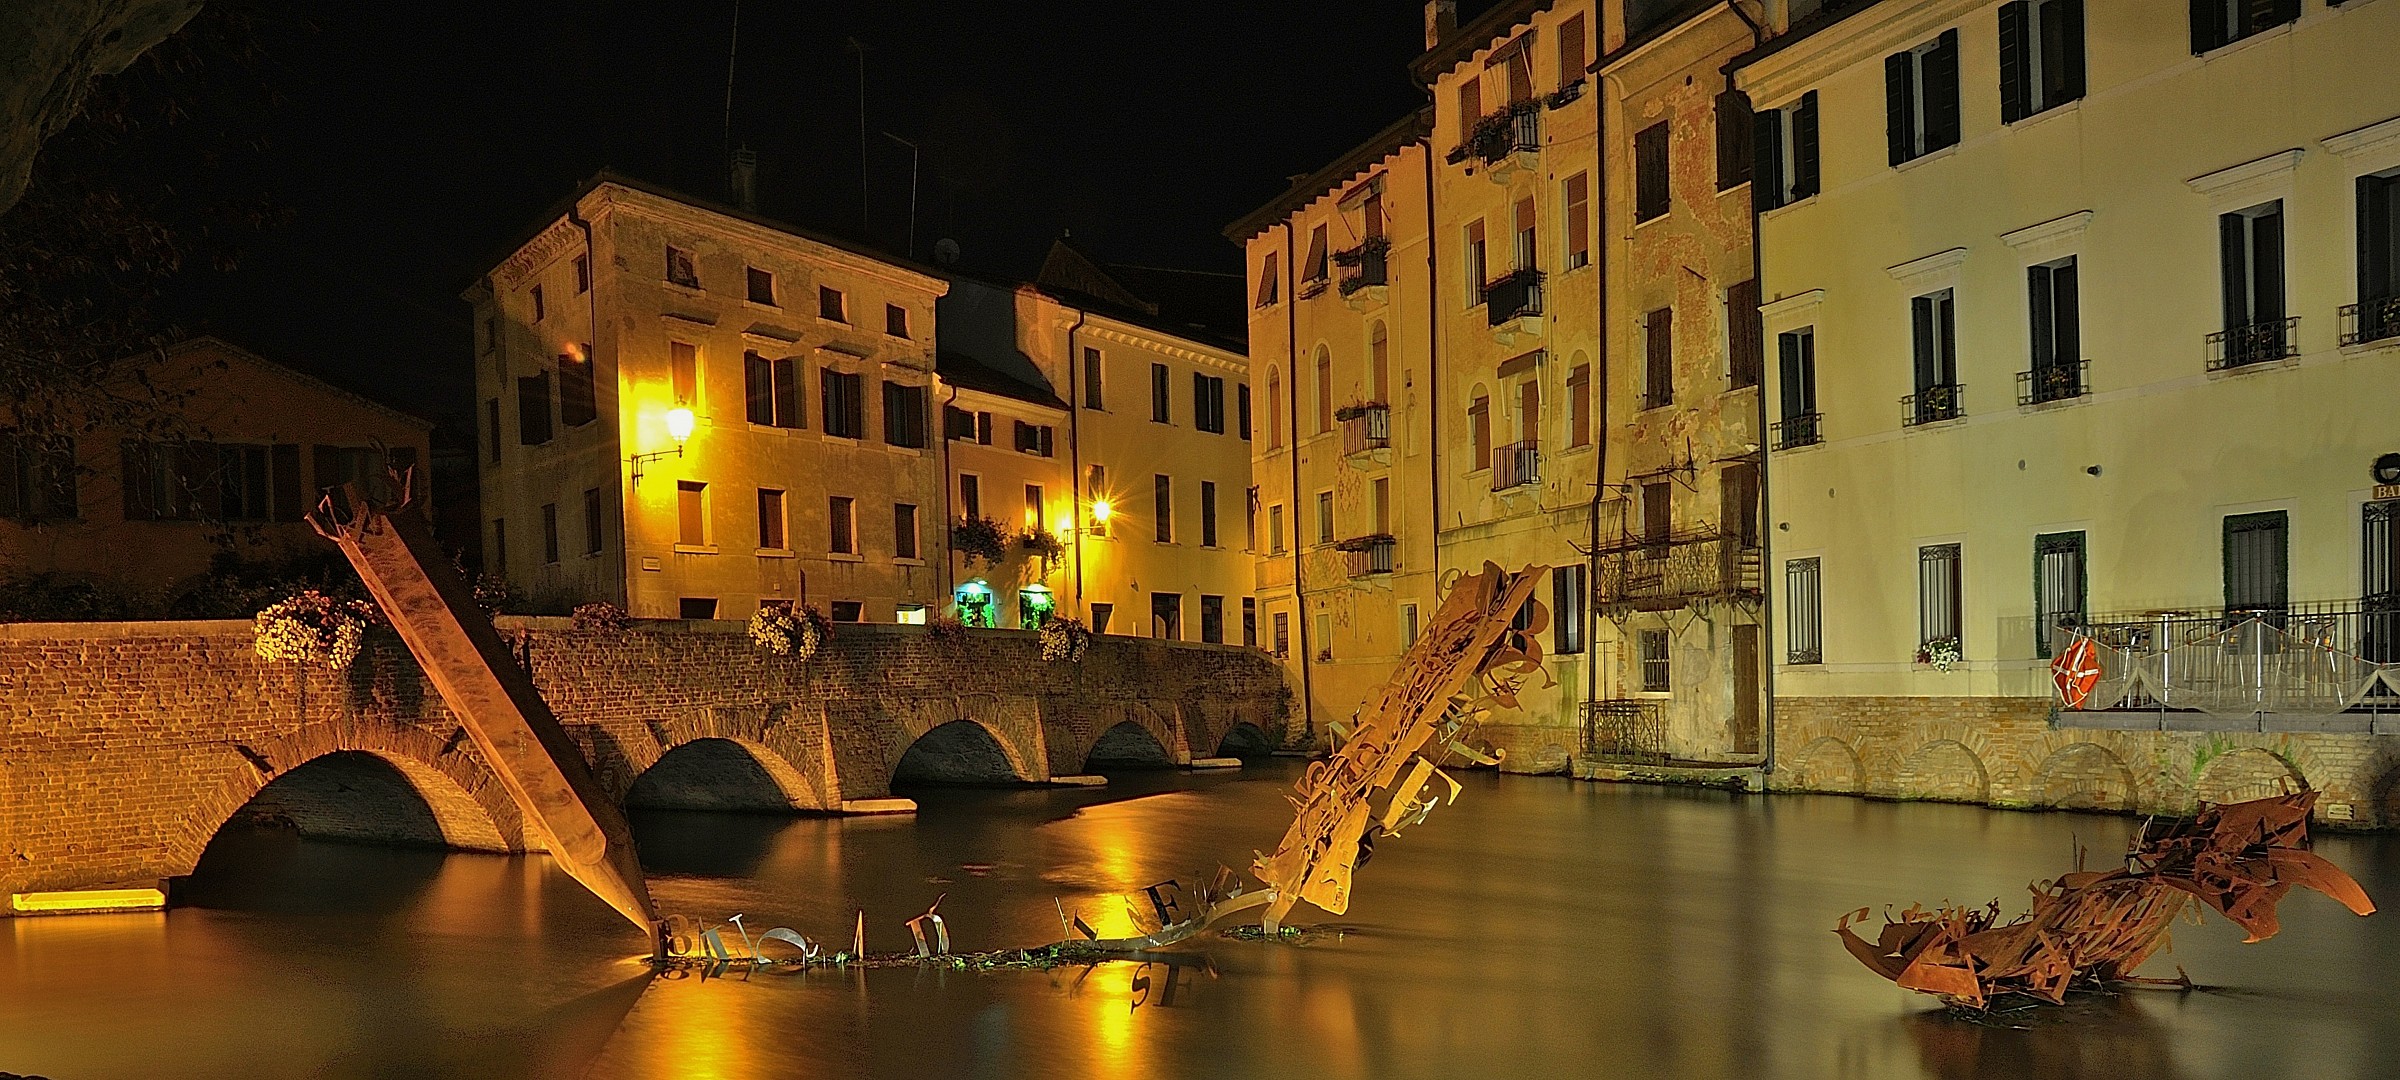 The sculptures of Treviso...